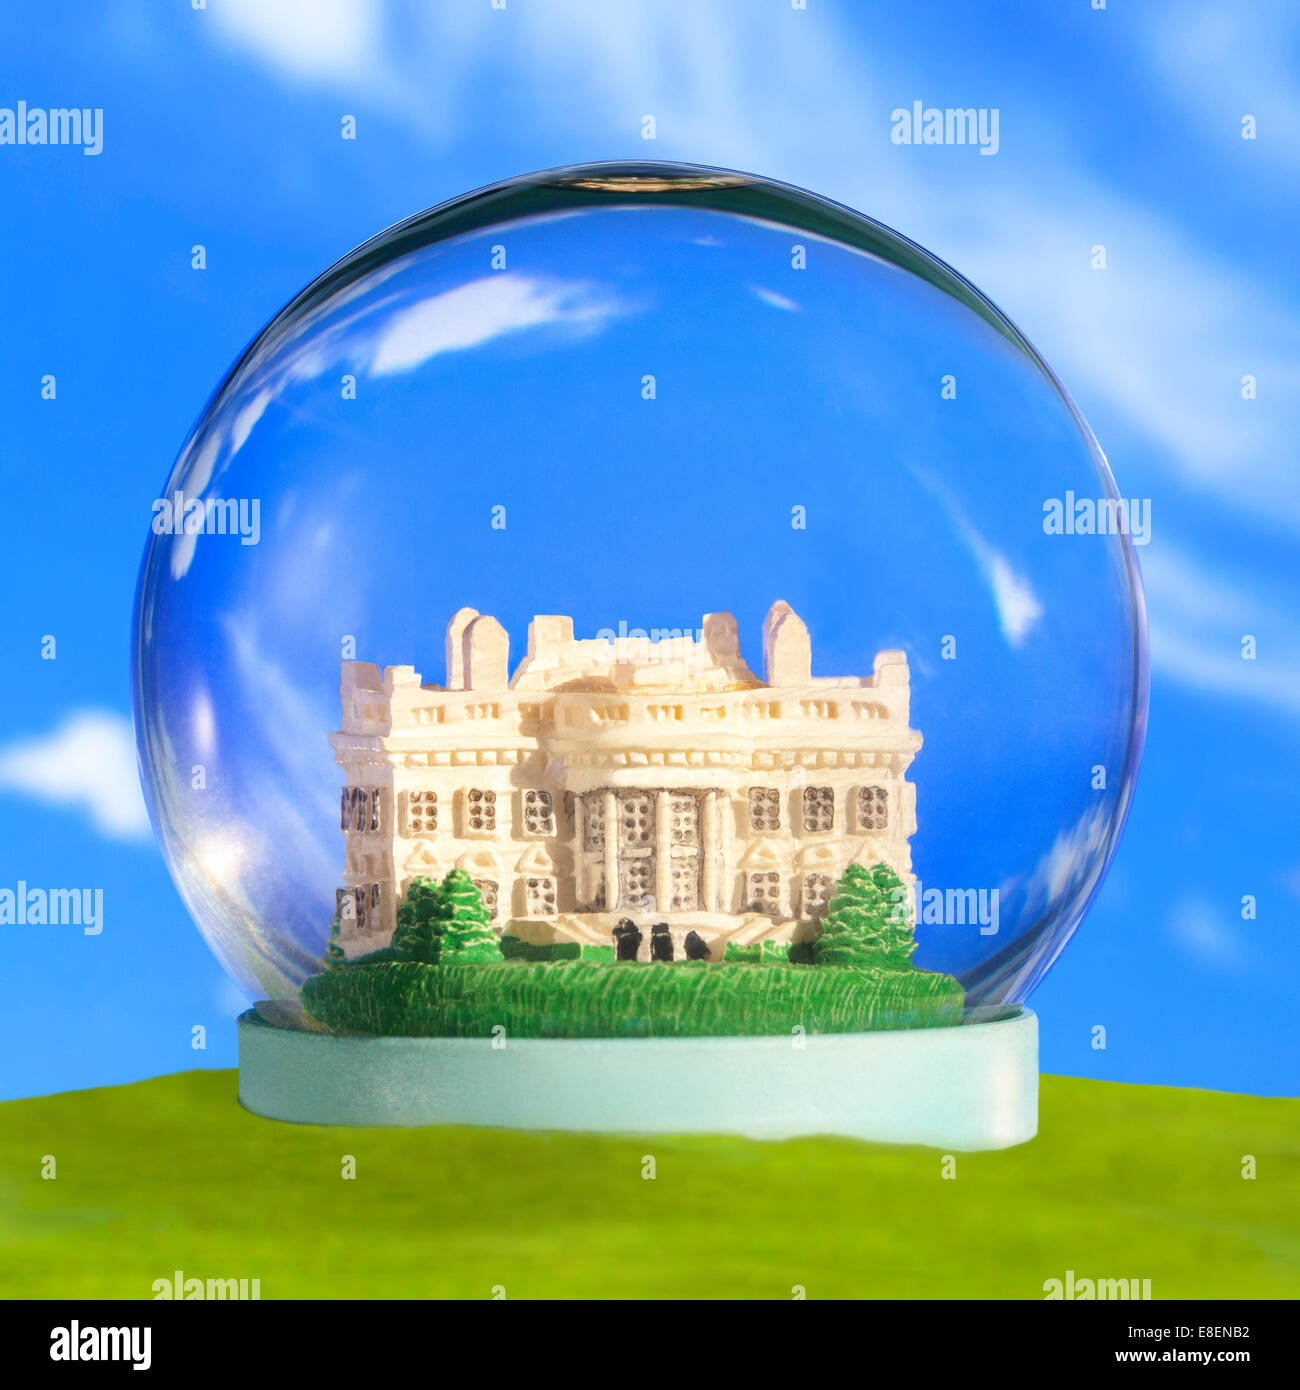 A Snow Globe Snow Dome Glass Bubble with the Washington DC White House. Concept safety security protection isolation disconnect Stock Photo